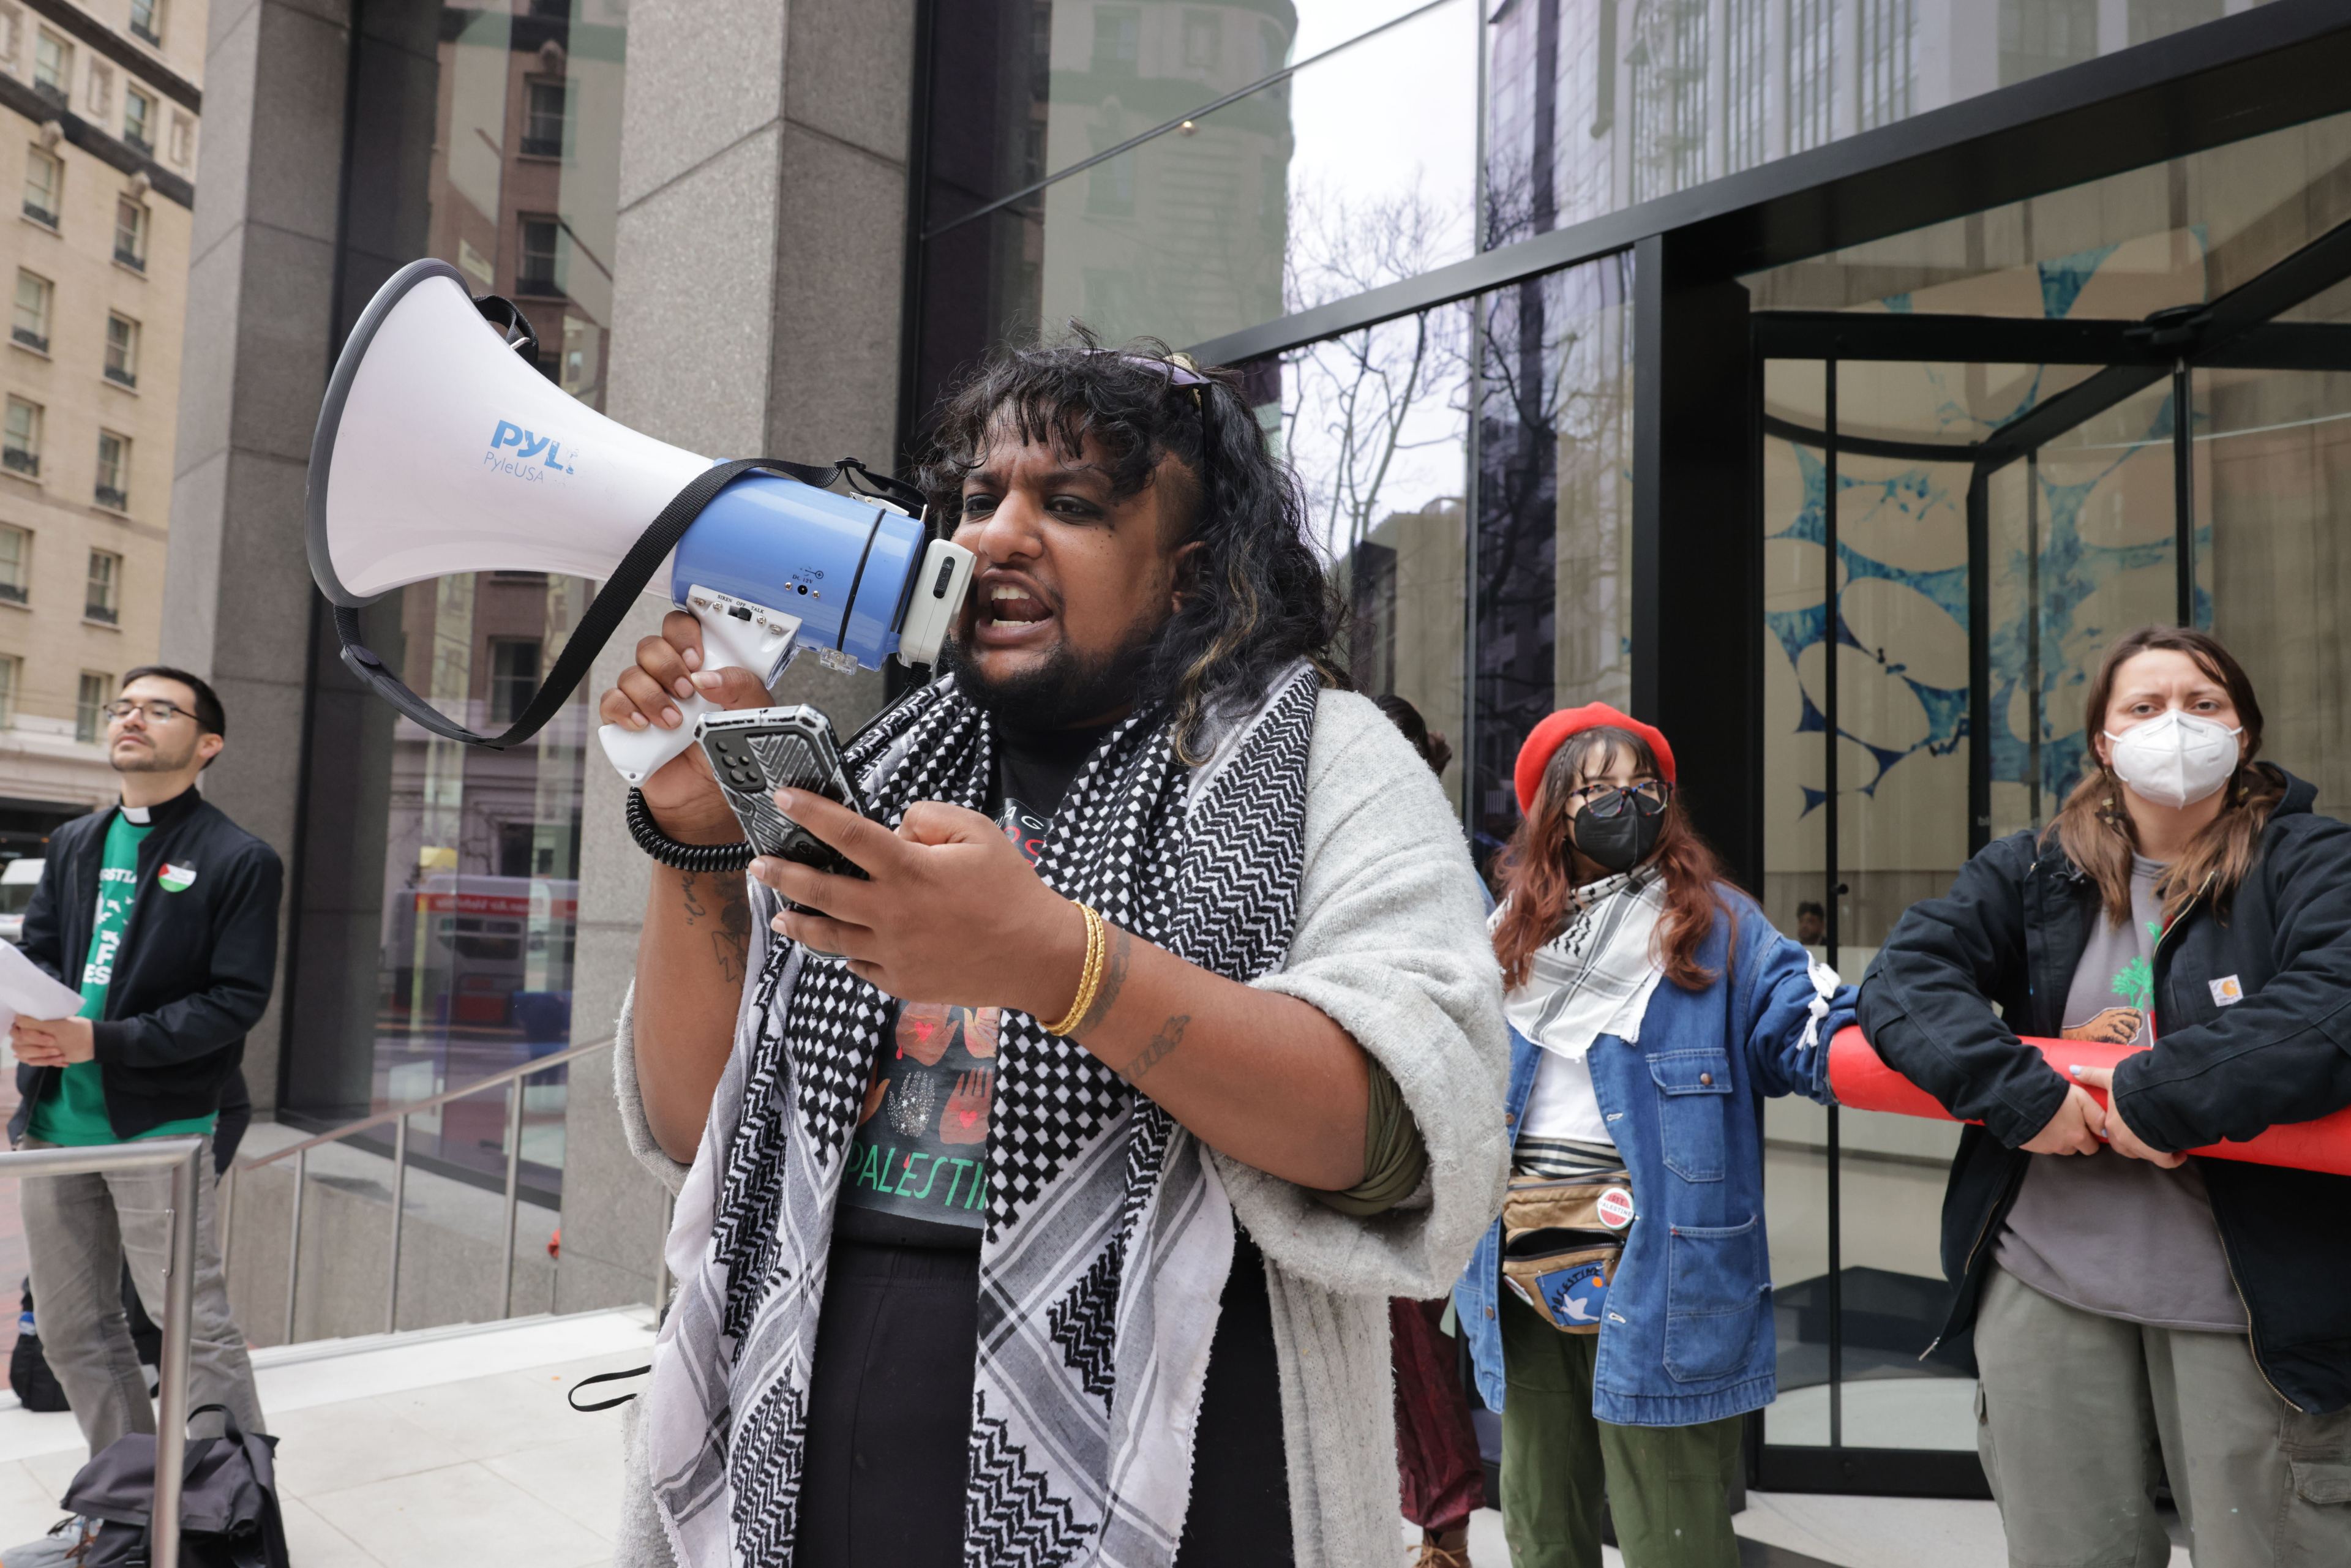 A person holding a bullhorn reads a statement from a cellphone in their hand outside an office building.